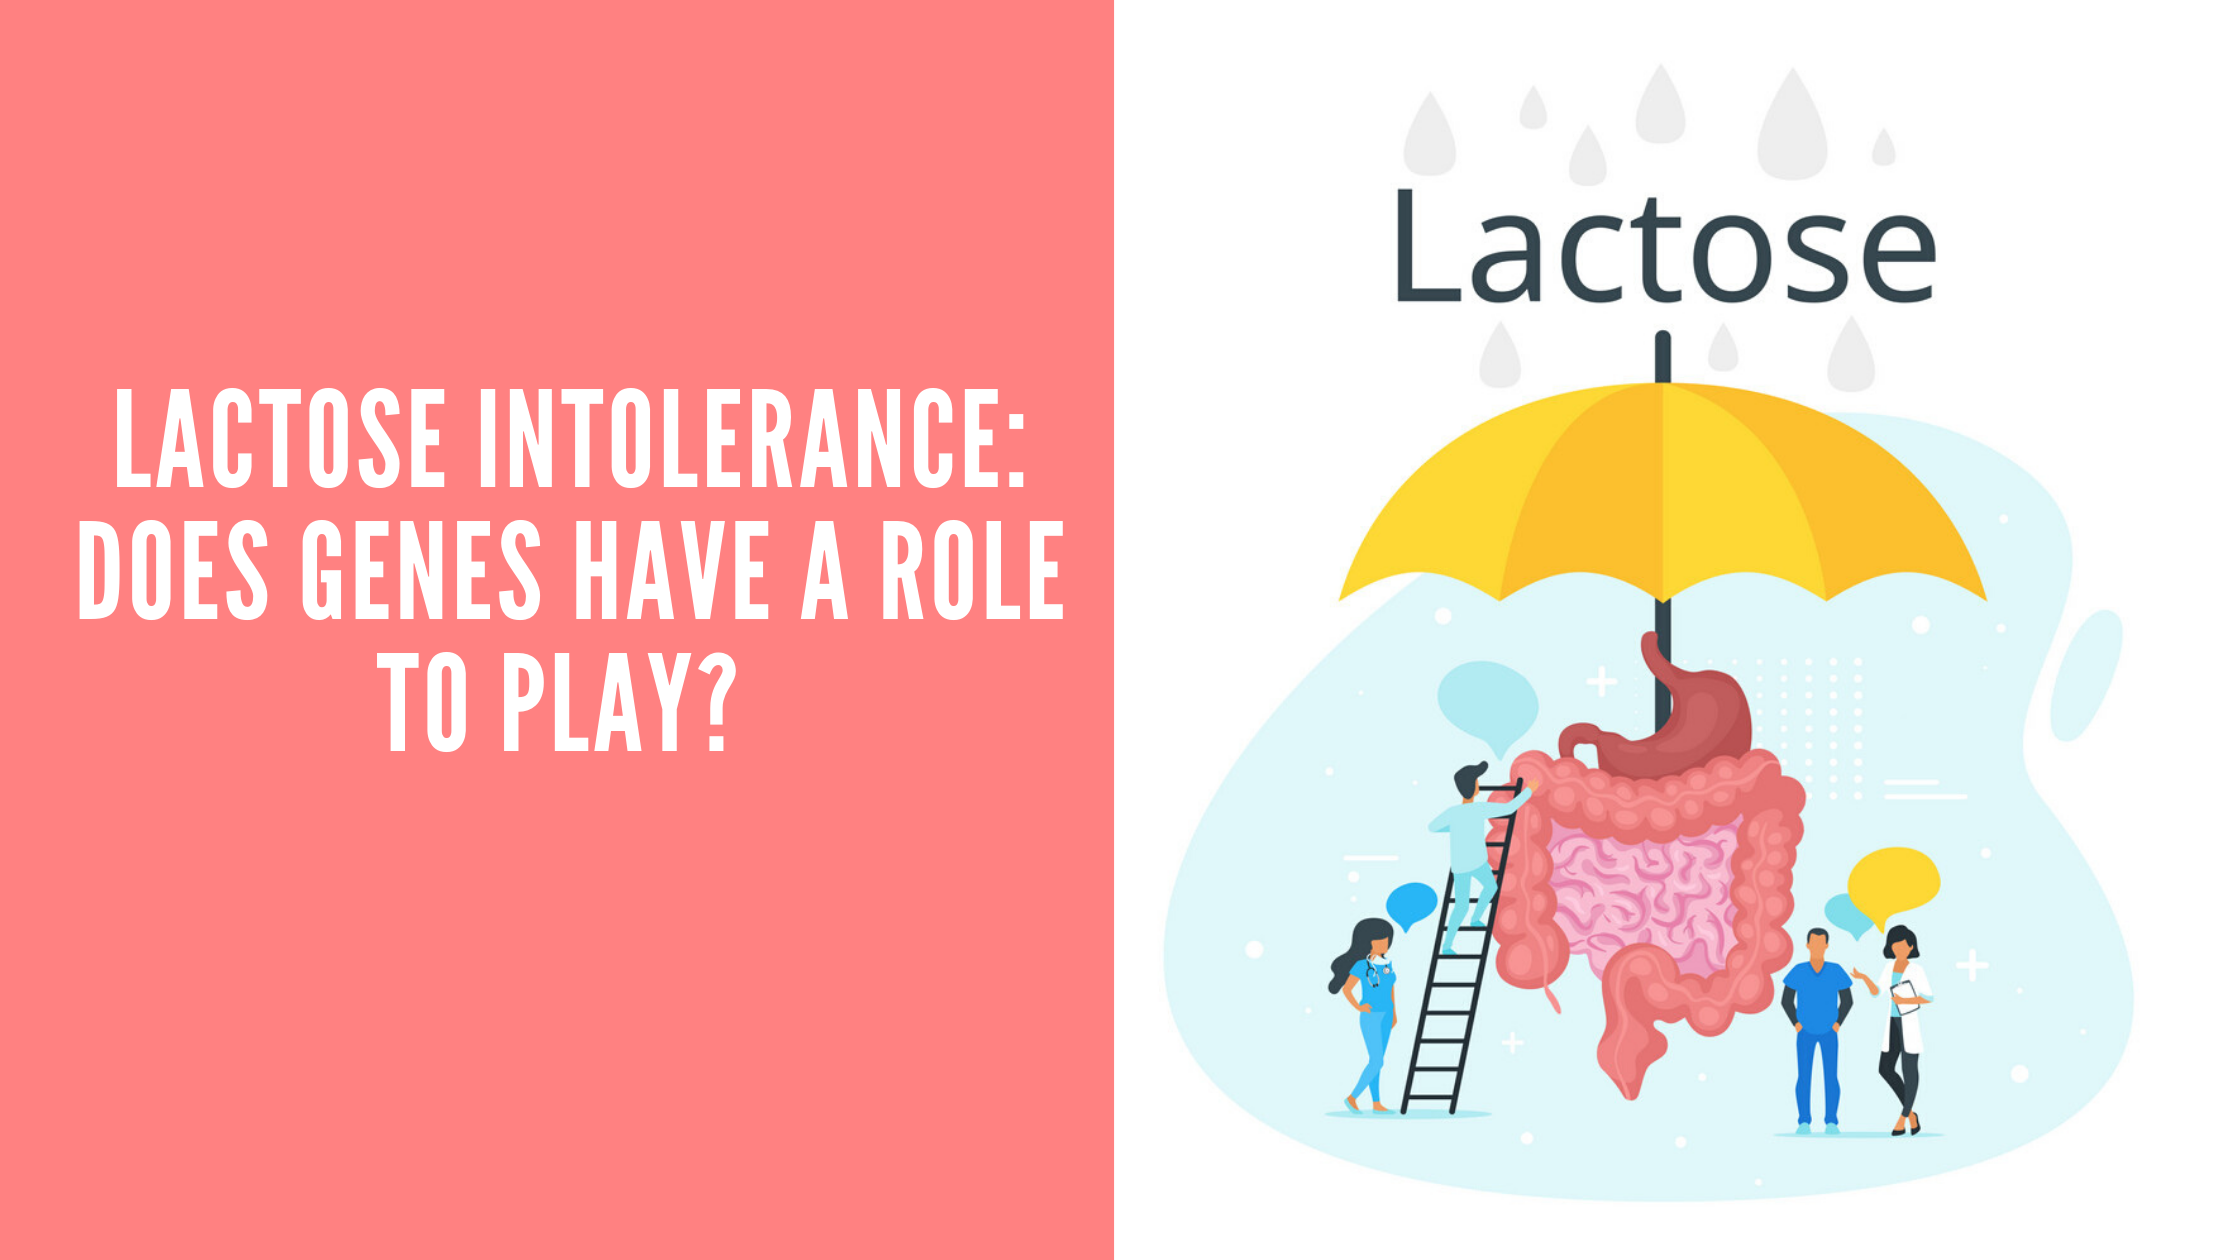 Lactose Intolerance: Do Genes have a role to Play?